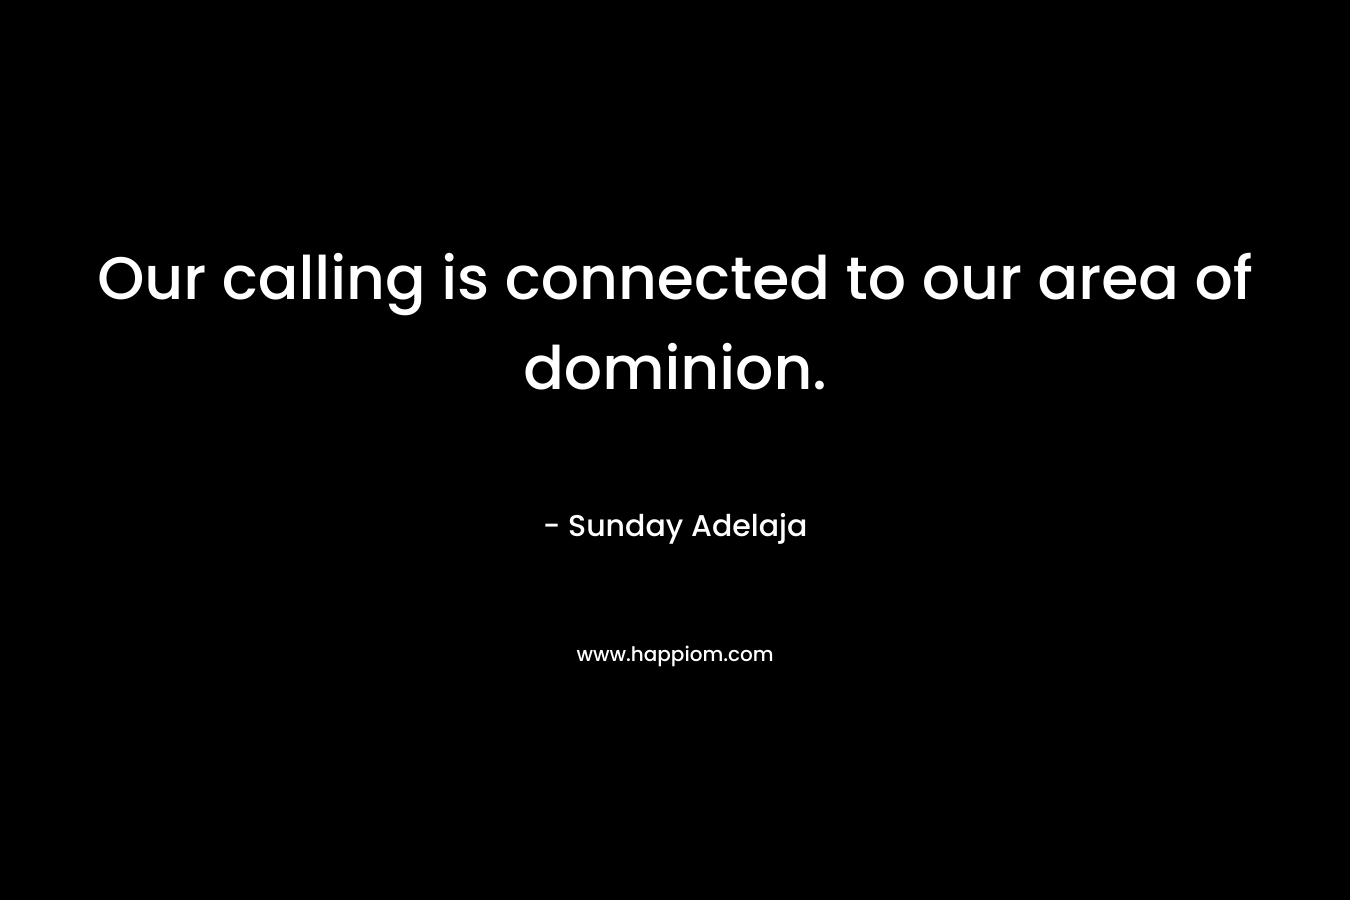 Our calling is connected to our area of dominion.